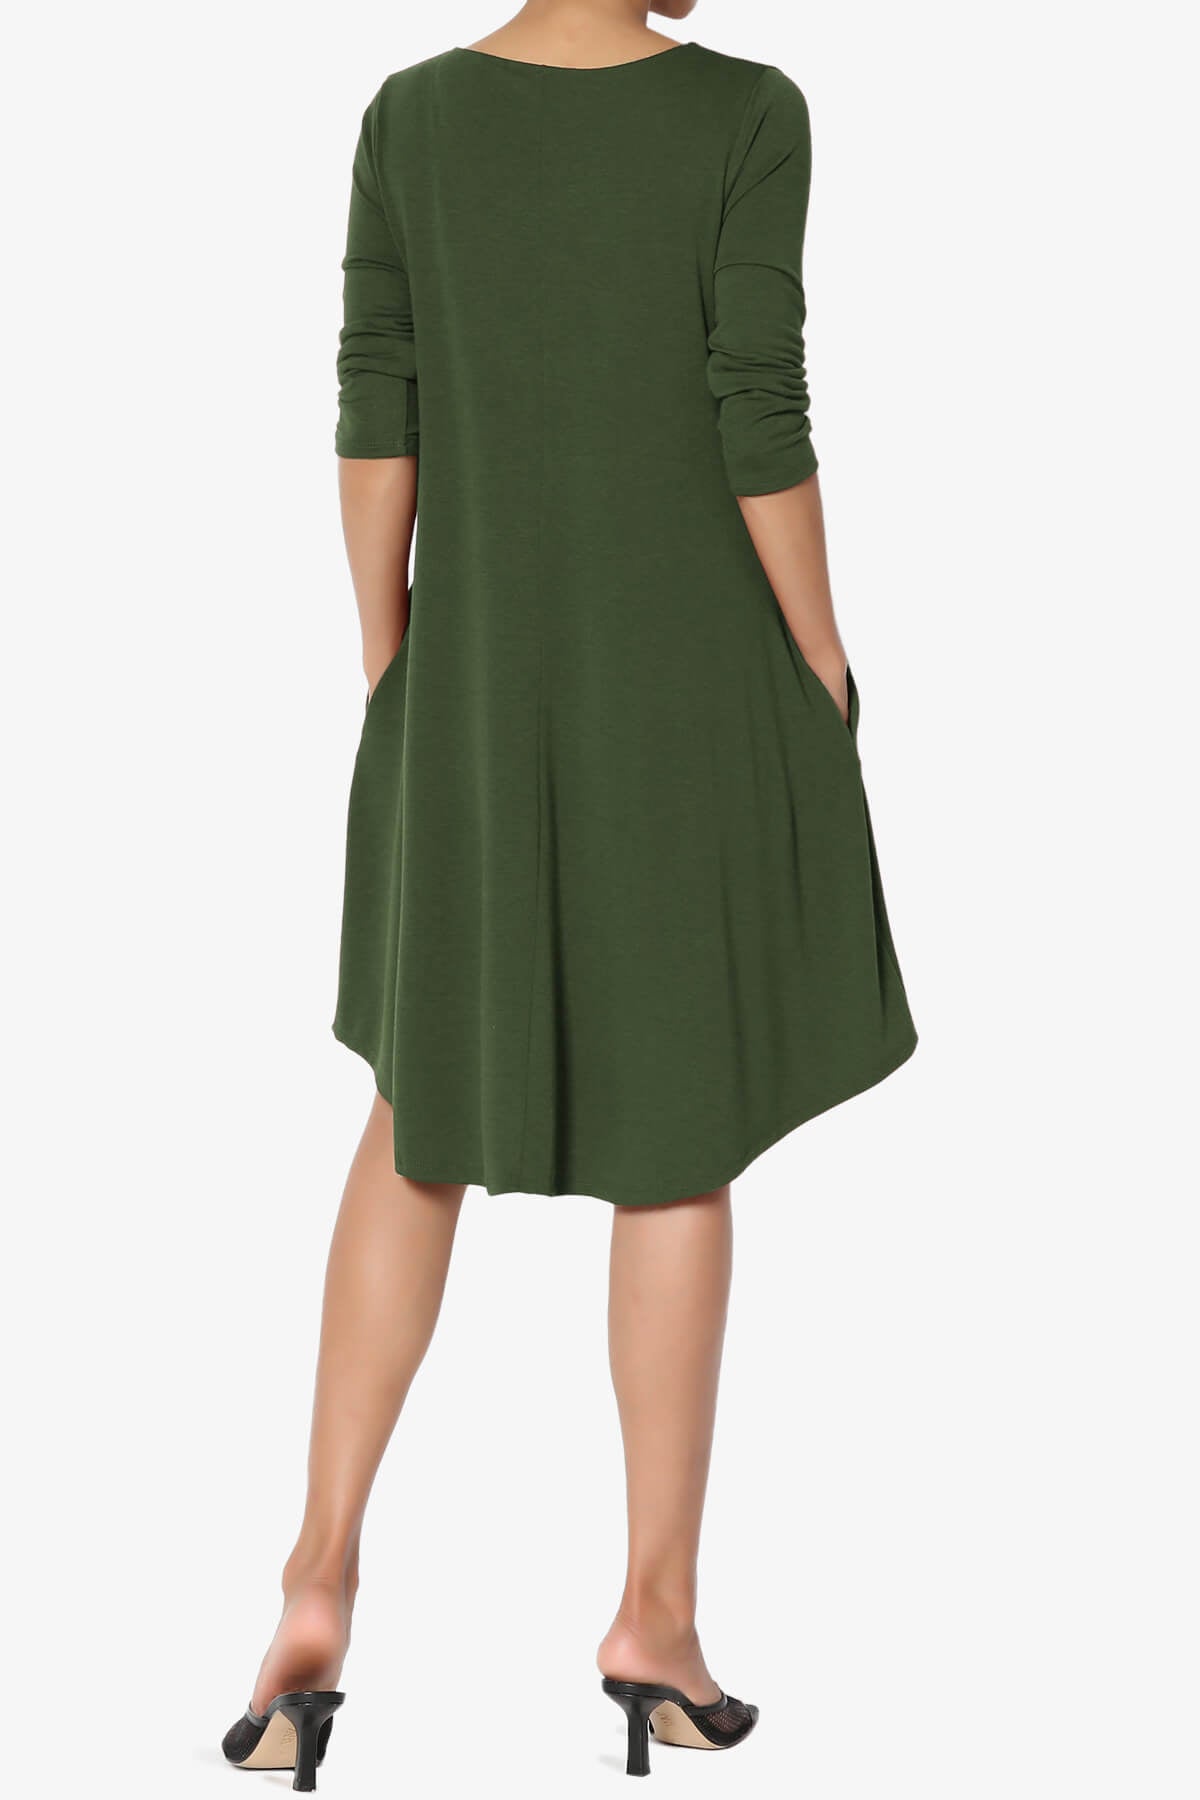 Ariella 3/4 Sleeve Strappy Scoop Neck Dress ARMY GREEN_2